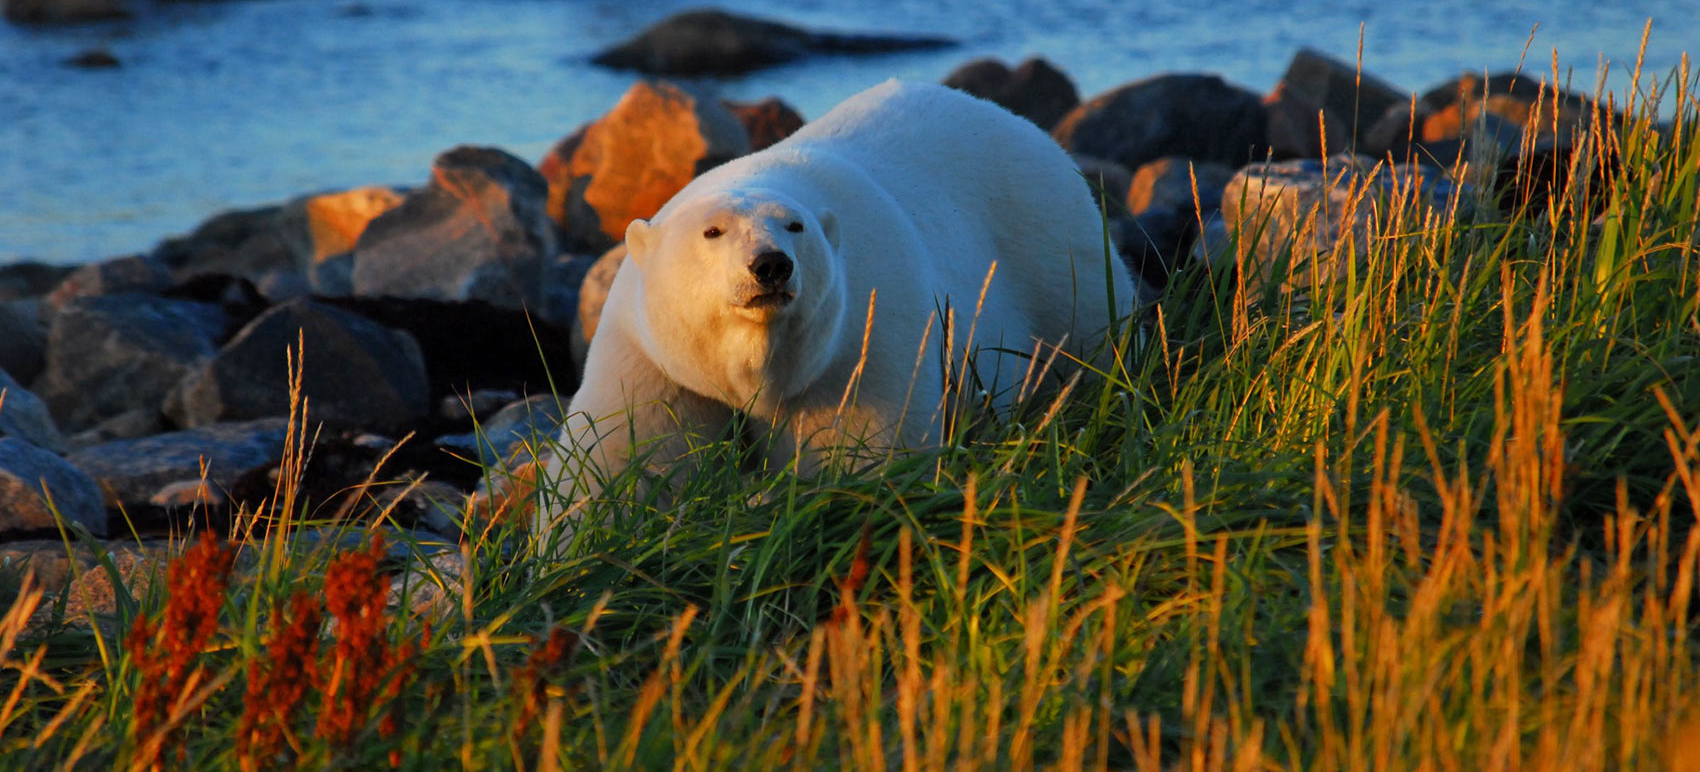 What is the best time to see polar bears?